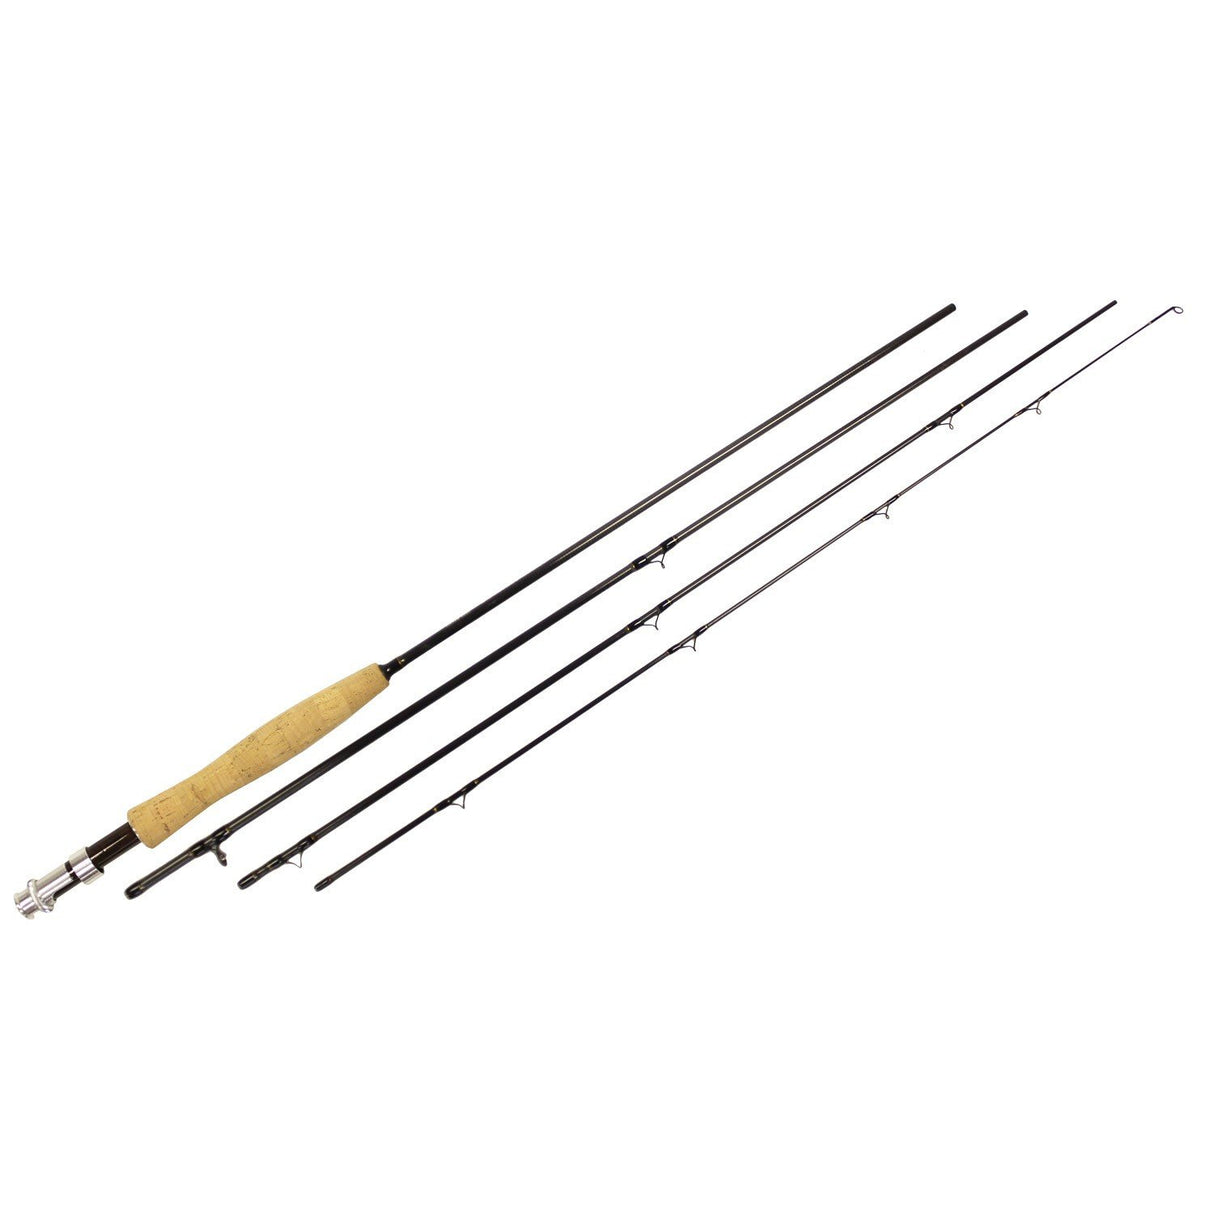 SHU-FLY 9'0" 4 PIECE FLY ROD FOR 3 WEIGHT